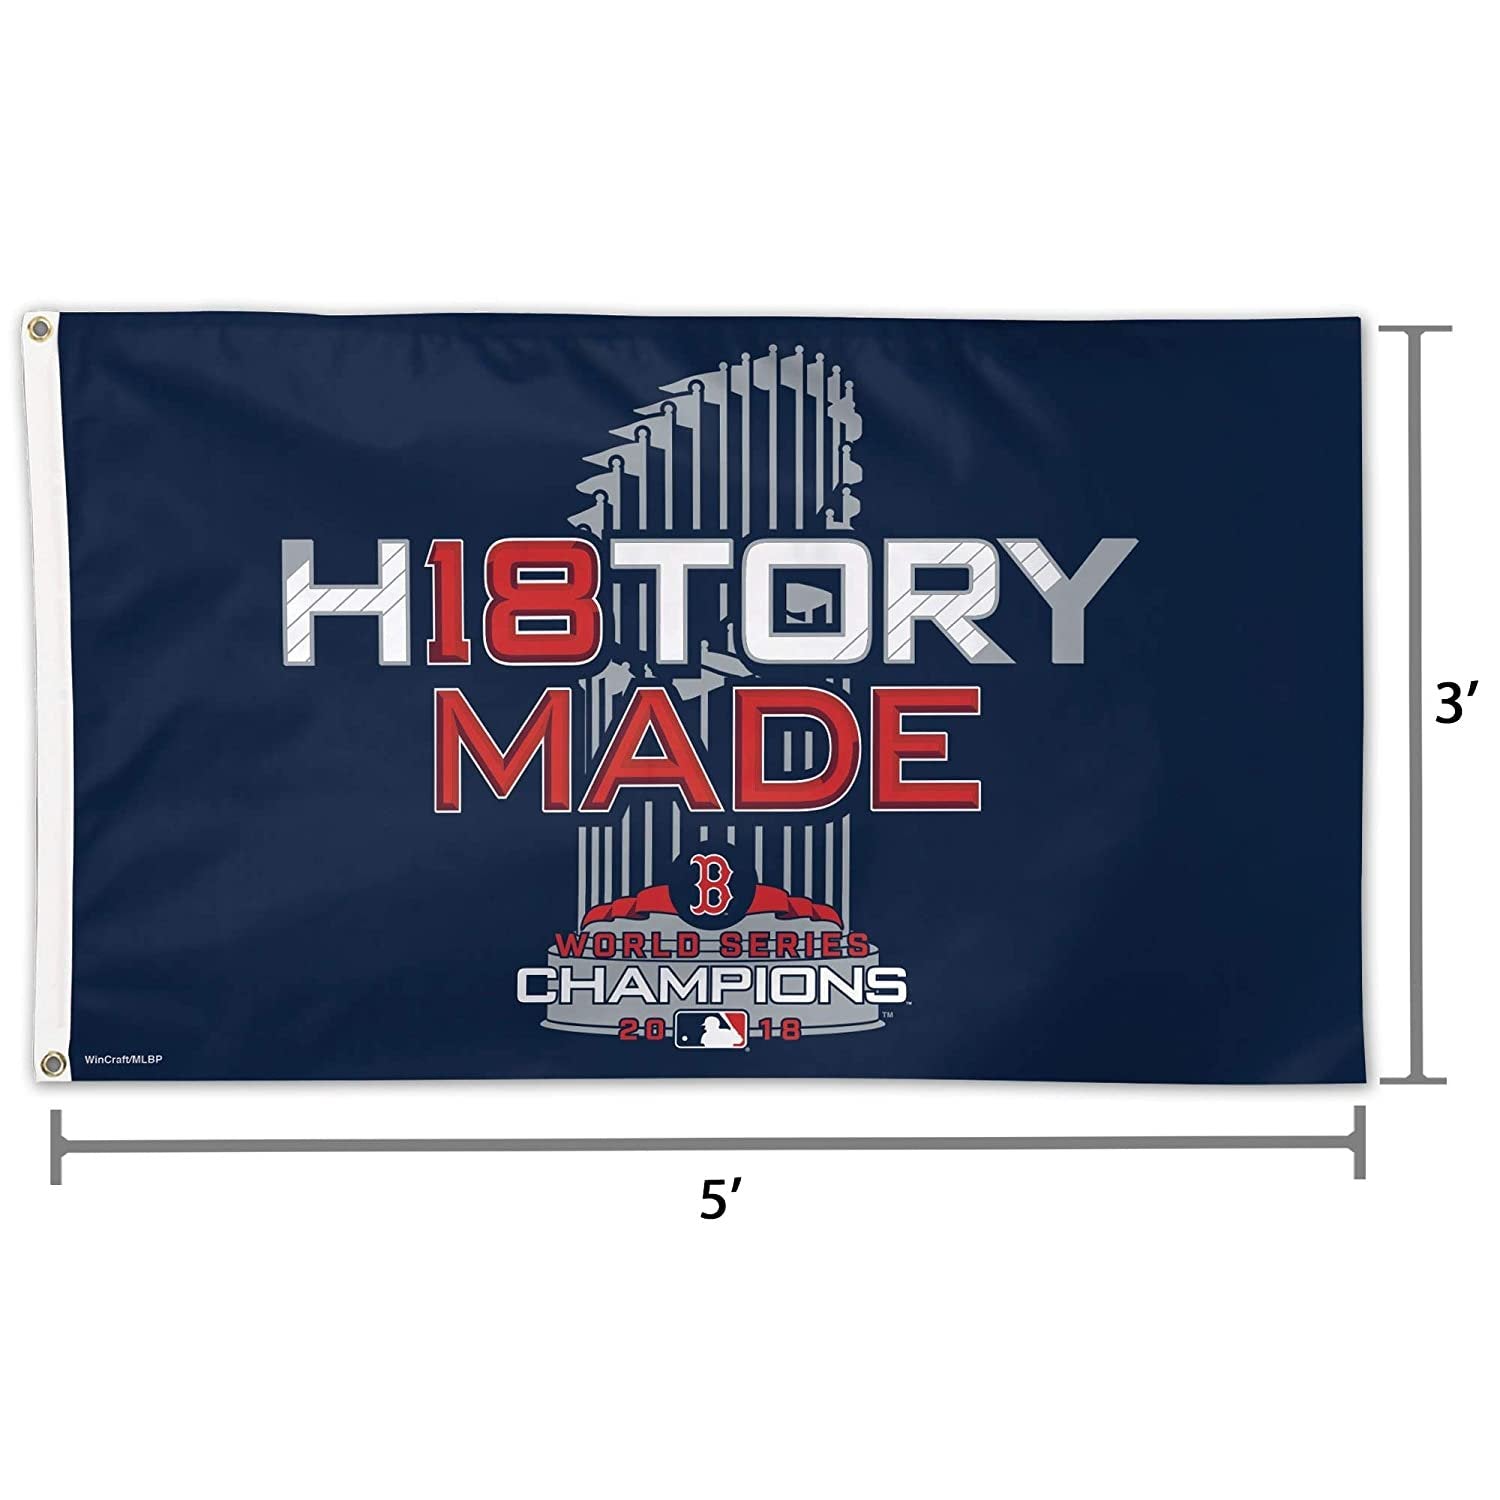 Boston Red Sox 2018 World Series Champions 3x5 Feet Flag Banner, Locker Room Edition, Metal Grommets, Outdoor or Indoor Use